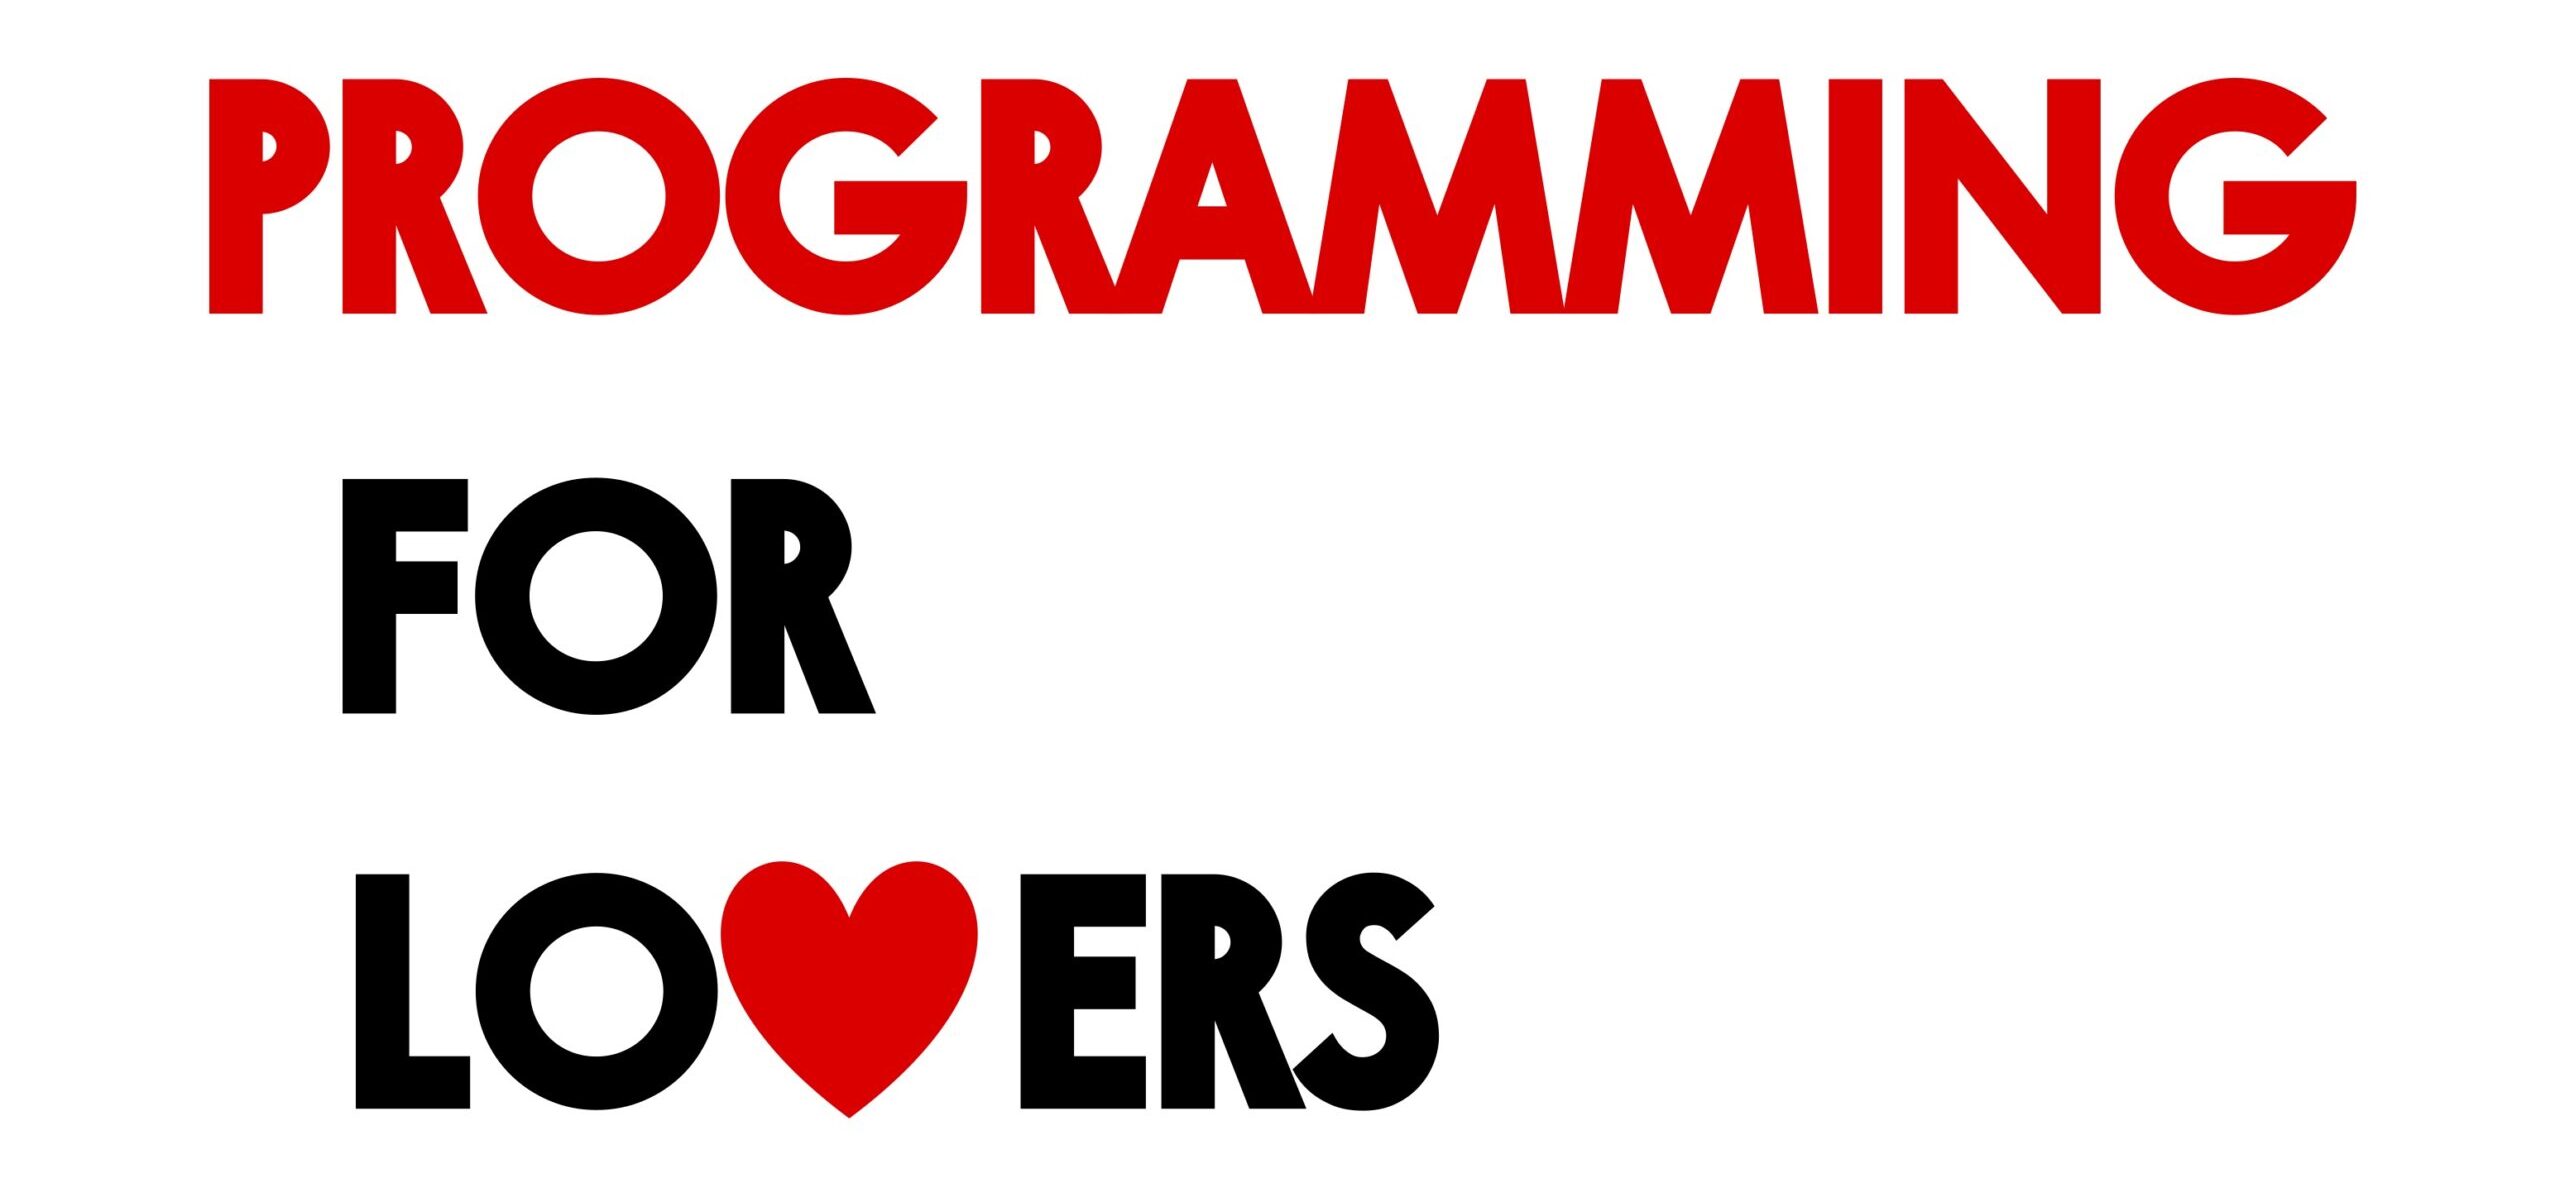 Programming for Lovers logo tall text only